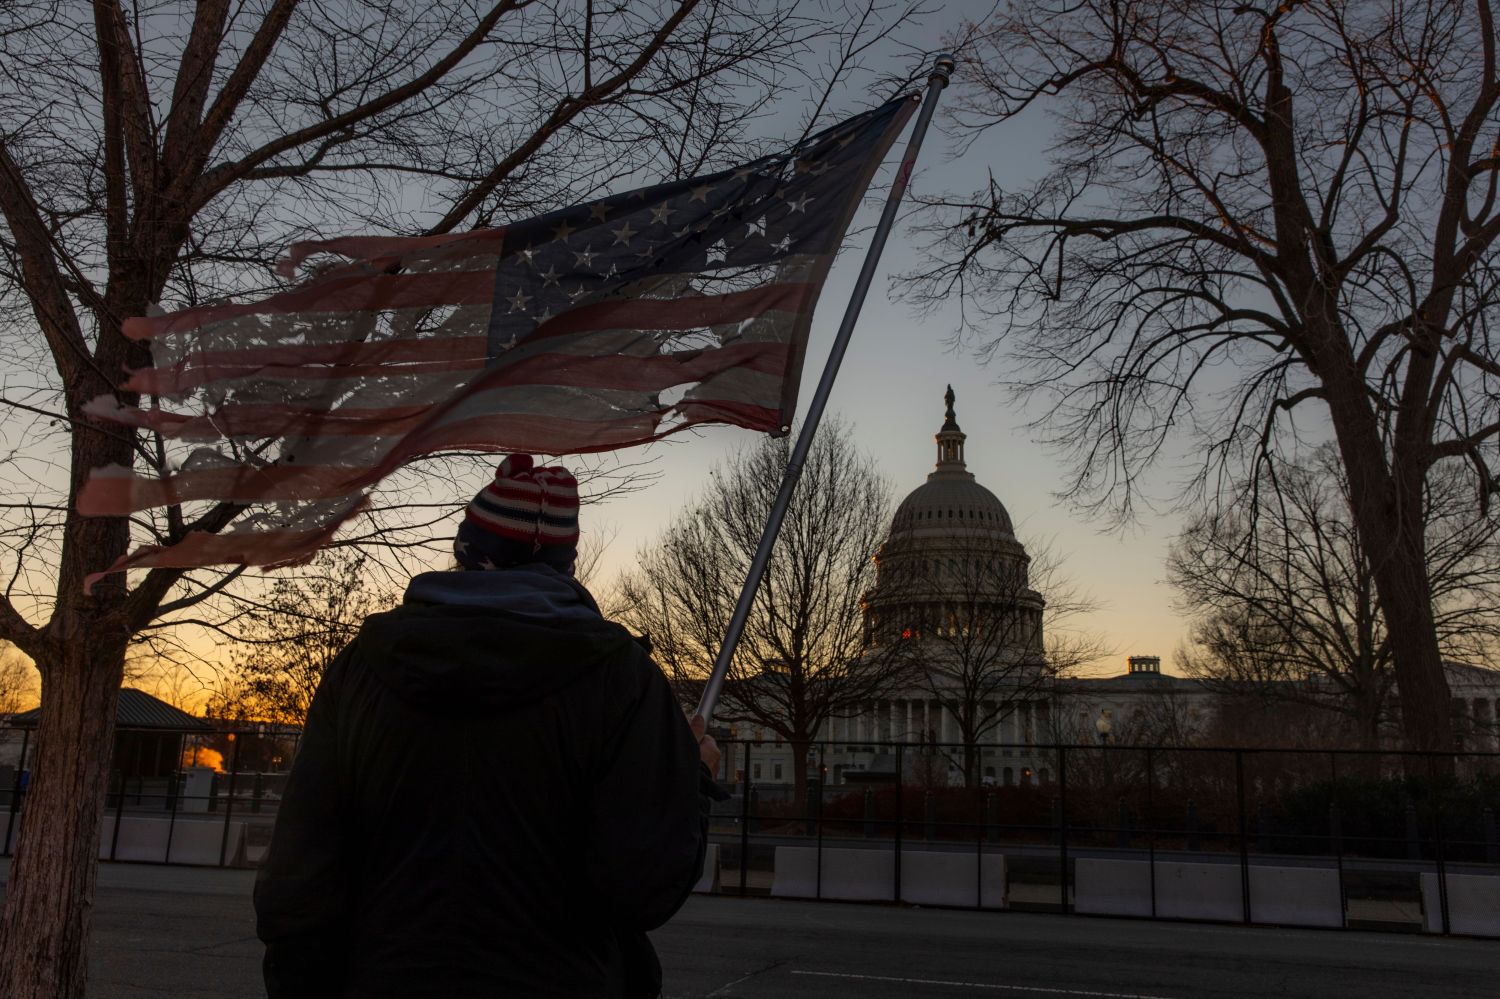 Washington DC, USA - January 9, 2021: A man with a flag watches as additional fencing is installed around the U.S. Capitol after the January 6 riots and ahead of President-Elect Biden's Inauguration.